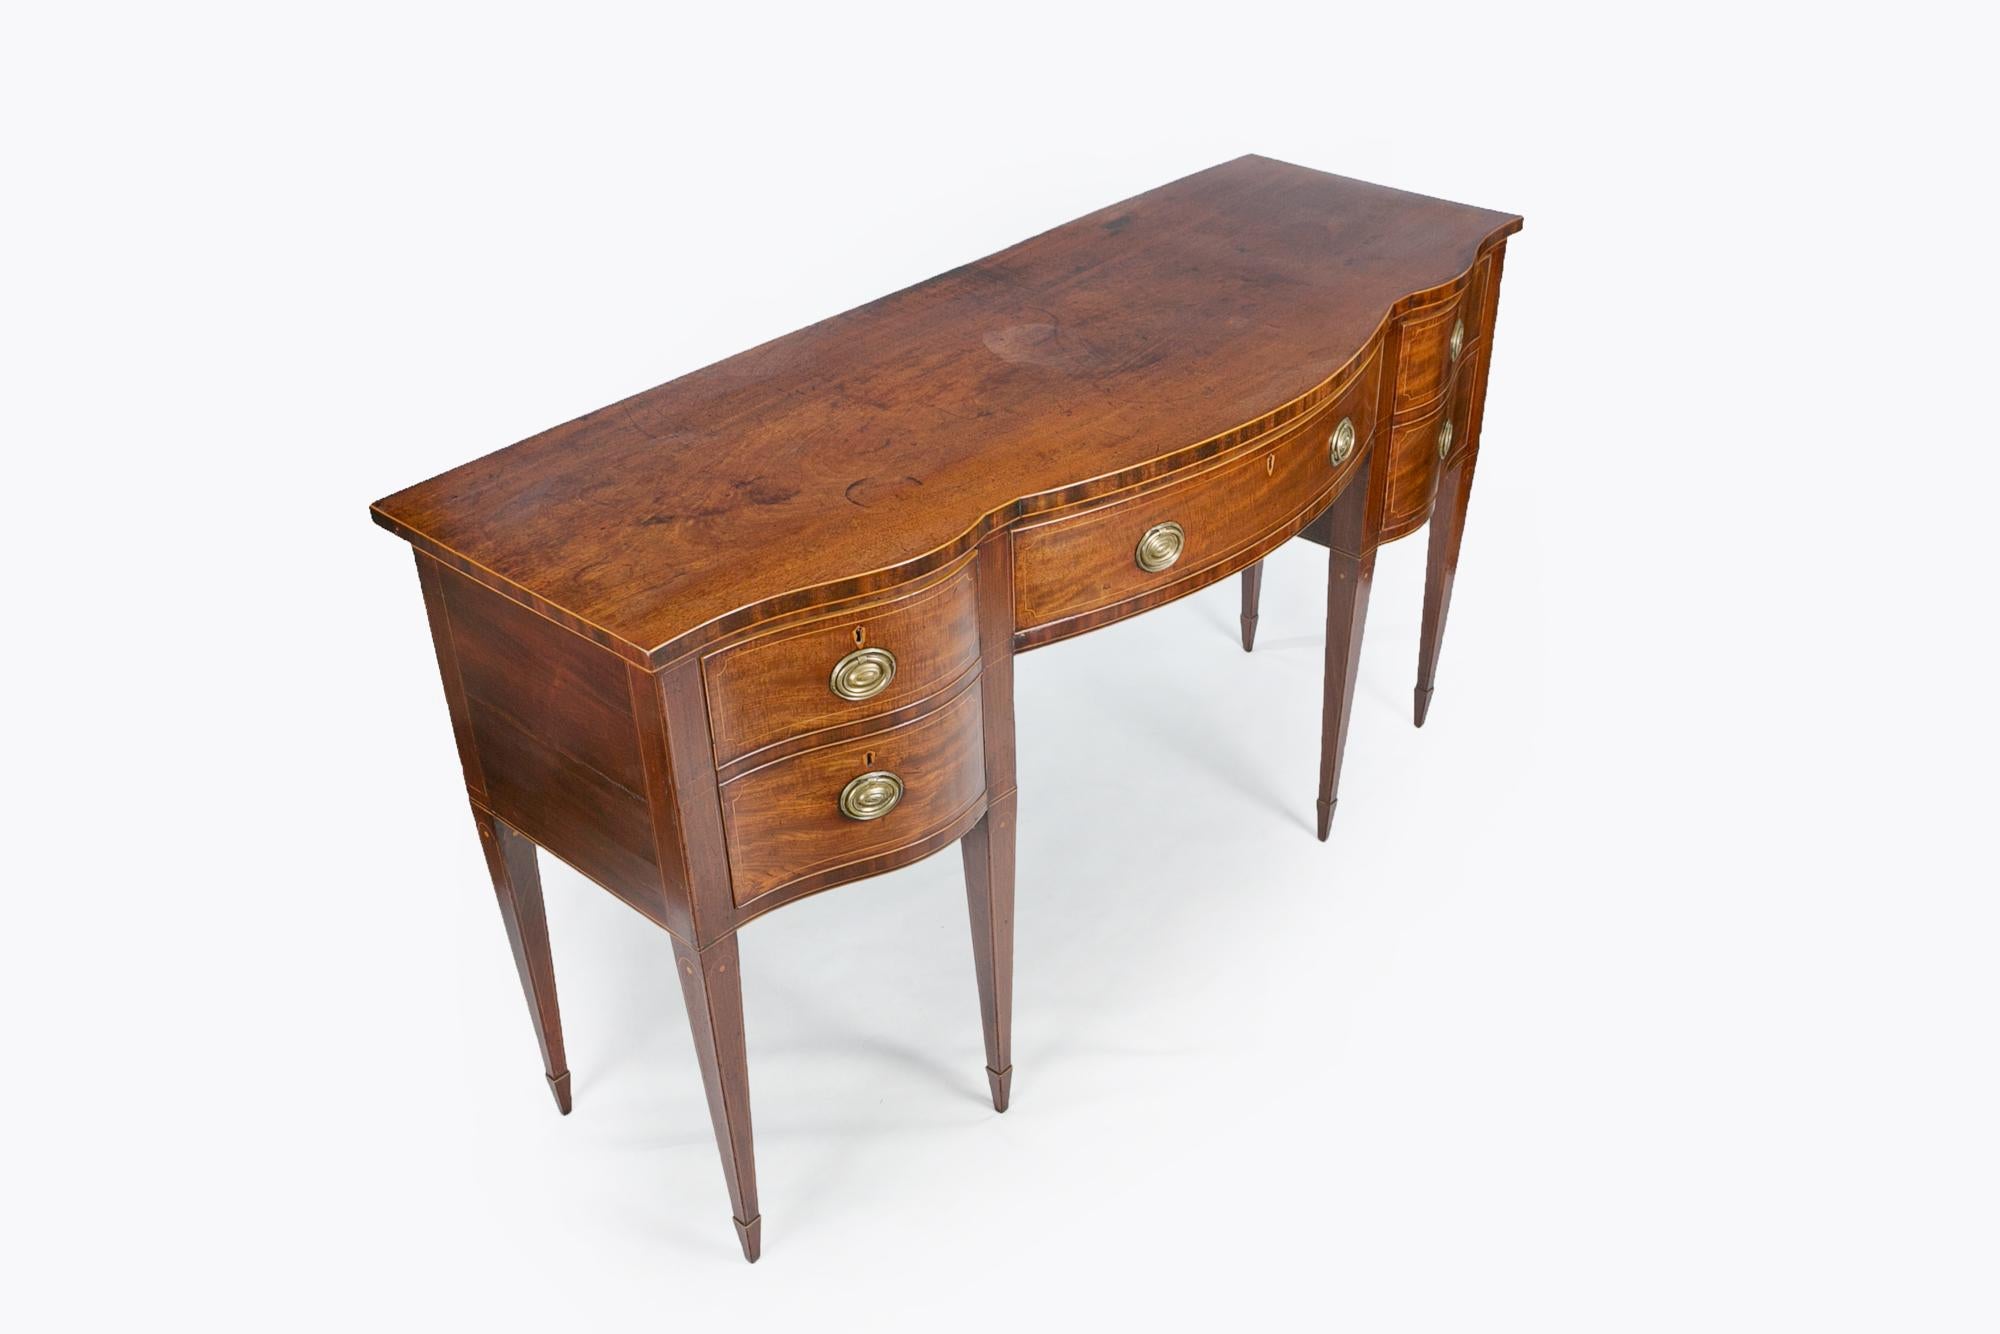 18th century George III mahogany serpentine fronted sideboard, the moulded top with satinwood line inlay raised over central bow shaped cockbeaded drawer frieze flanked with pair of cellarete configured cockbeaded drawers, all with decorative brass